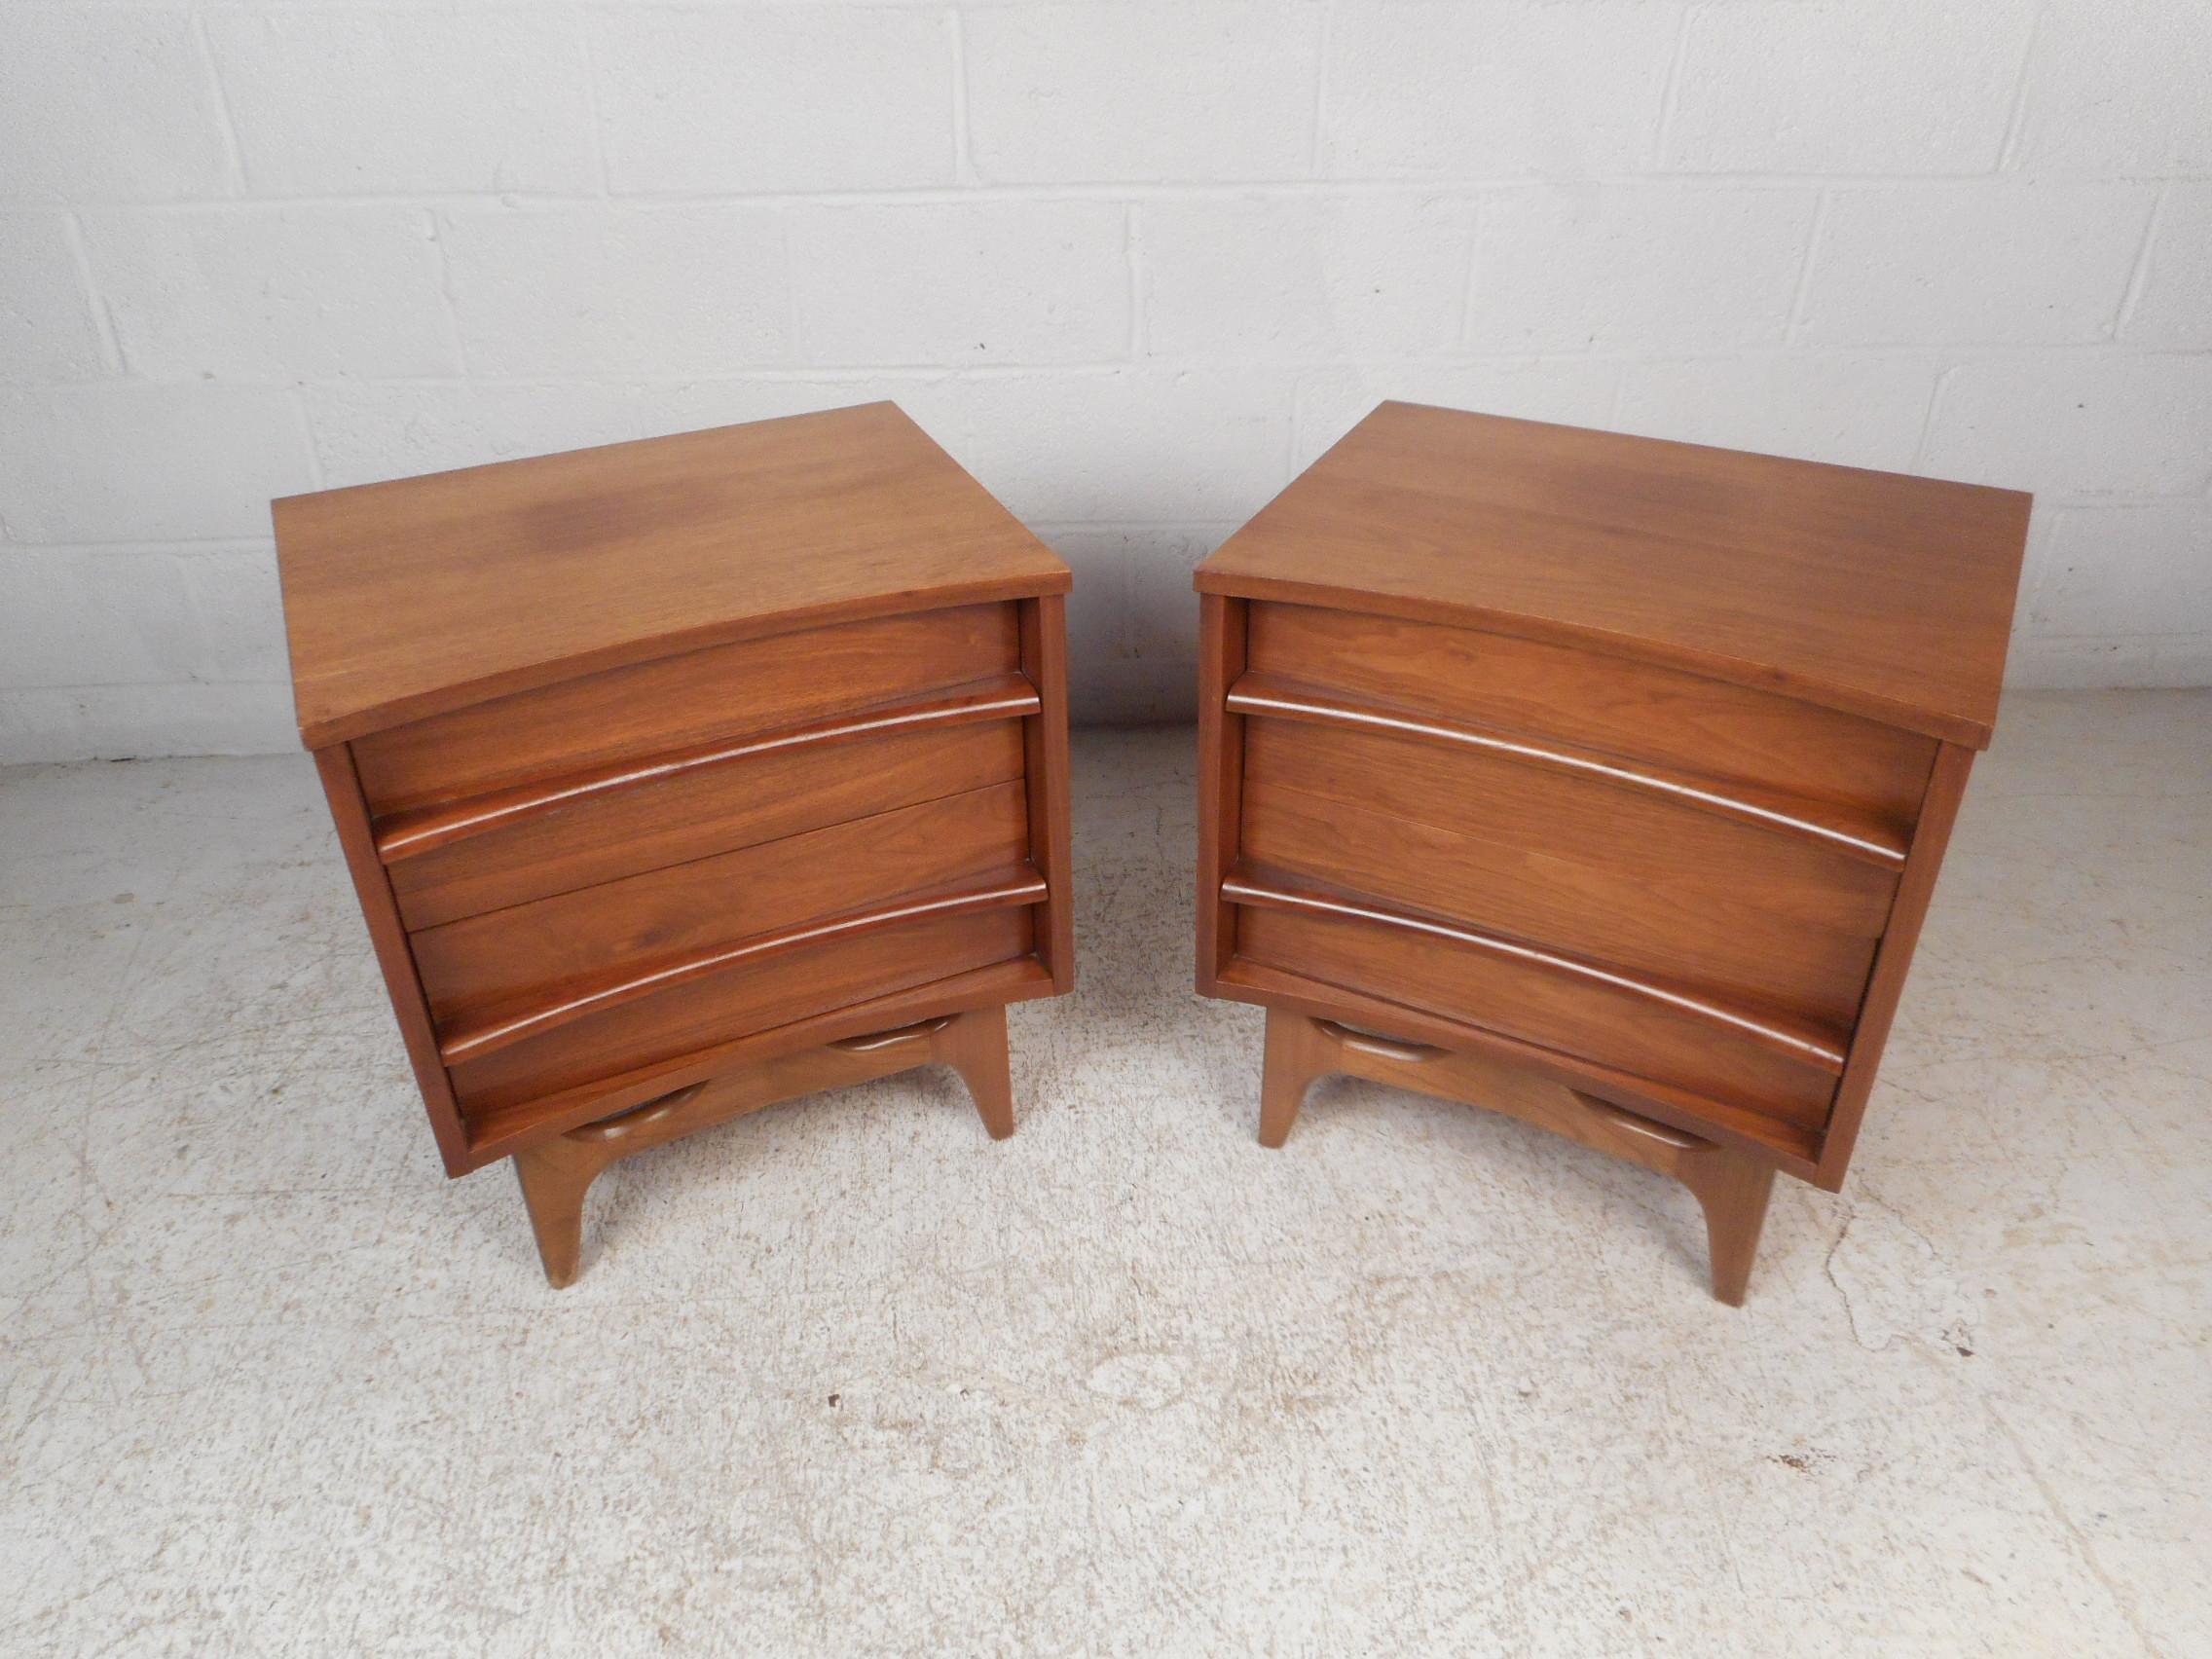 Impressive pair of midcentury nightstands. Sturdy pieces featuring a curved front end and drawers which give this pair a distinctive visual profile. Two dovetail-jointed drawers with sculpted pulls offer ample storage space with style. This pair is